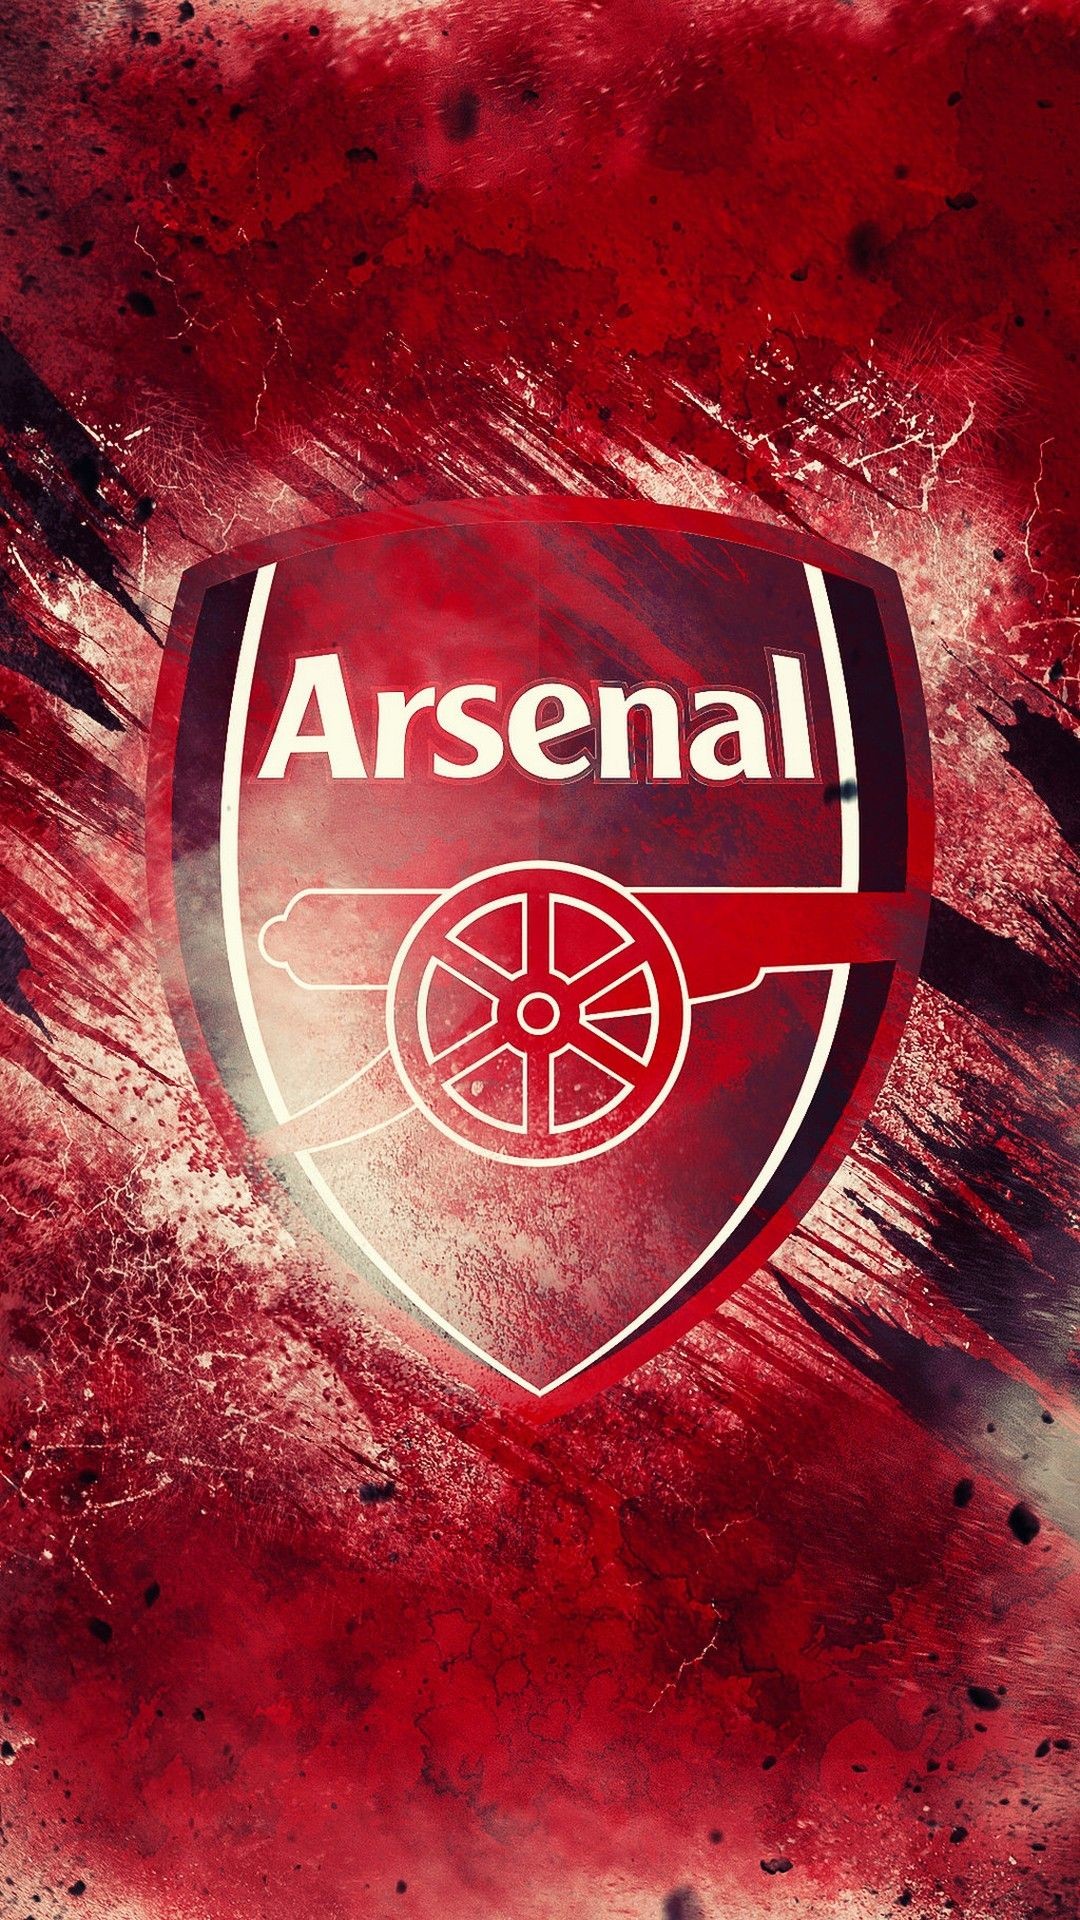 Arsenal wallpapers pictures